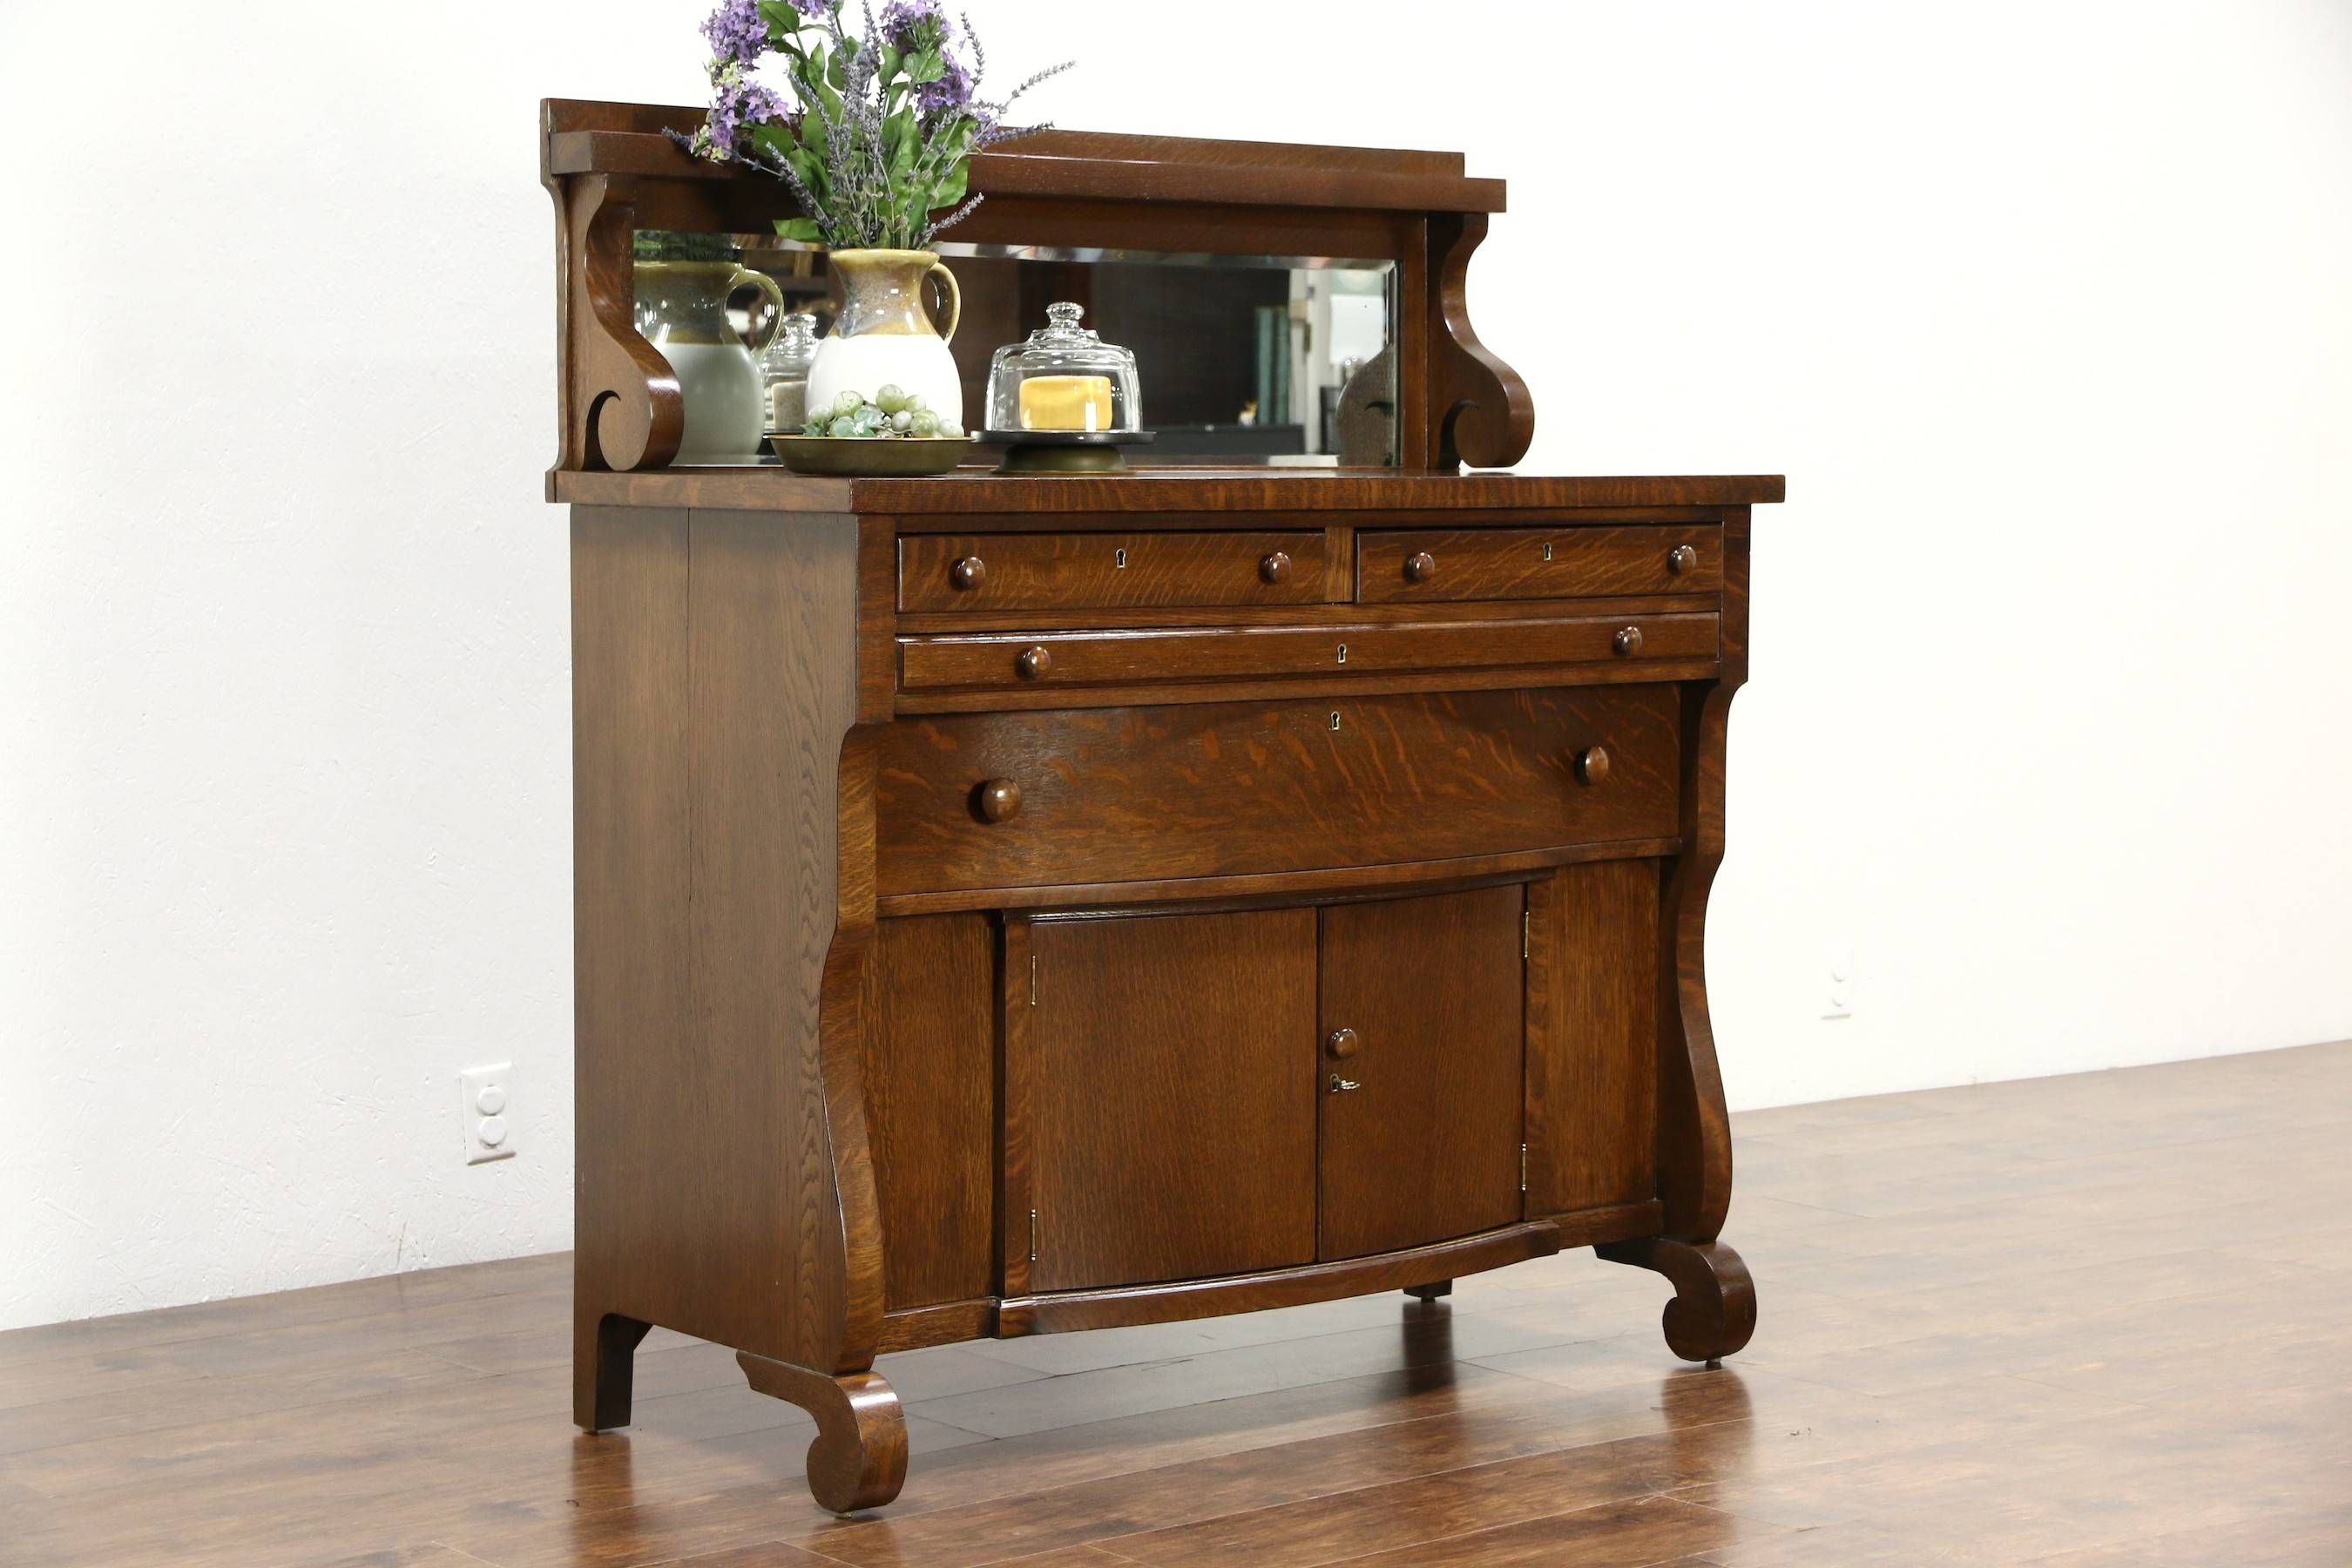 Sold – Oak 1910 Antique Empire Sideboard, Server Or Buffet Inside Sideboard Mirror (View 20 of 20)